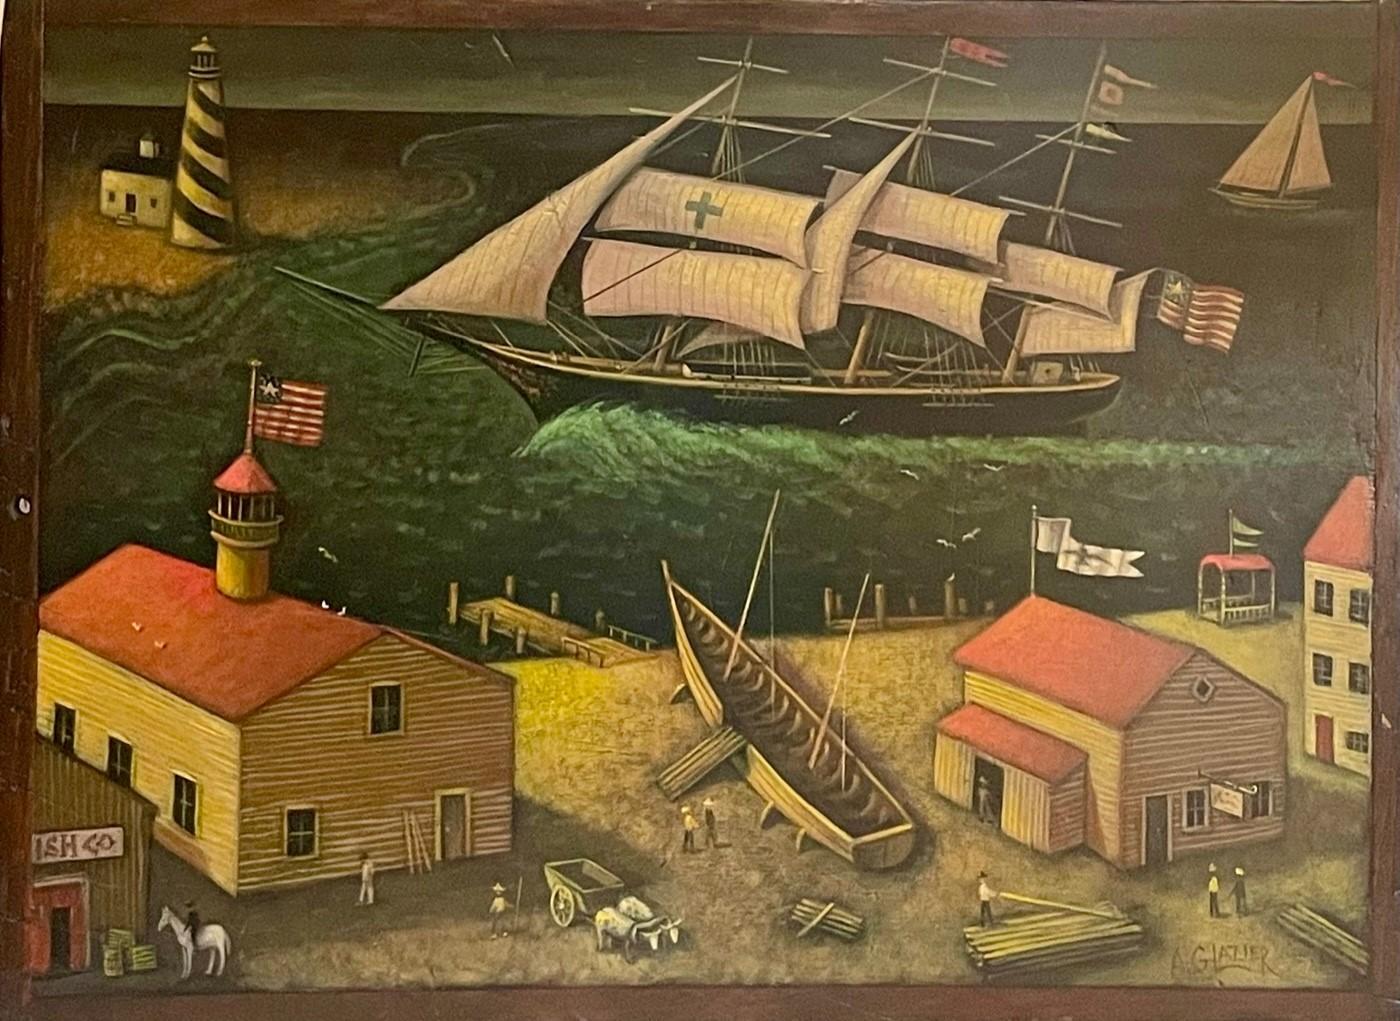 American folk art painting by Pennsylvania Artist, Arthur Glazier (1928-2015).

Most charming nautical Folk Art painting pictures a New England harbor scene.
The details are beautifully observed and masterfully executed. This signed Arthur